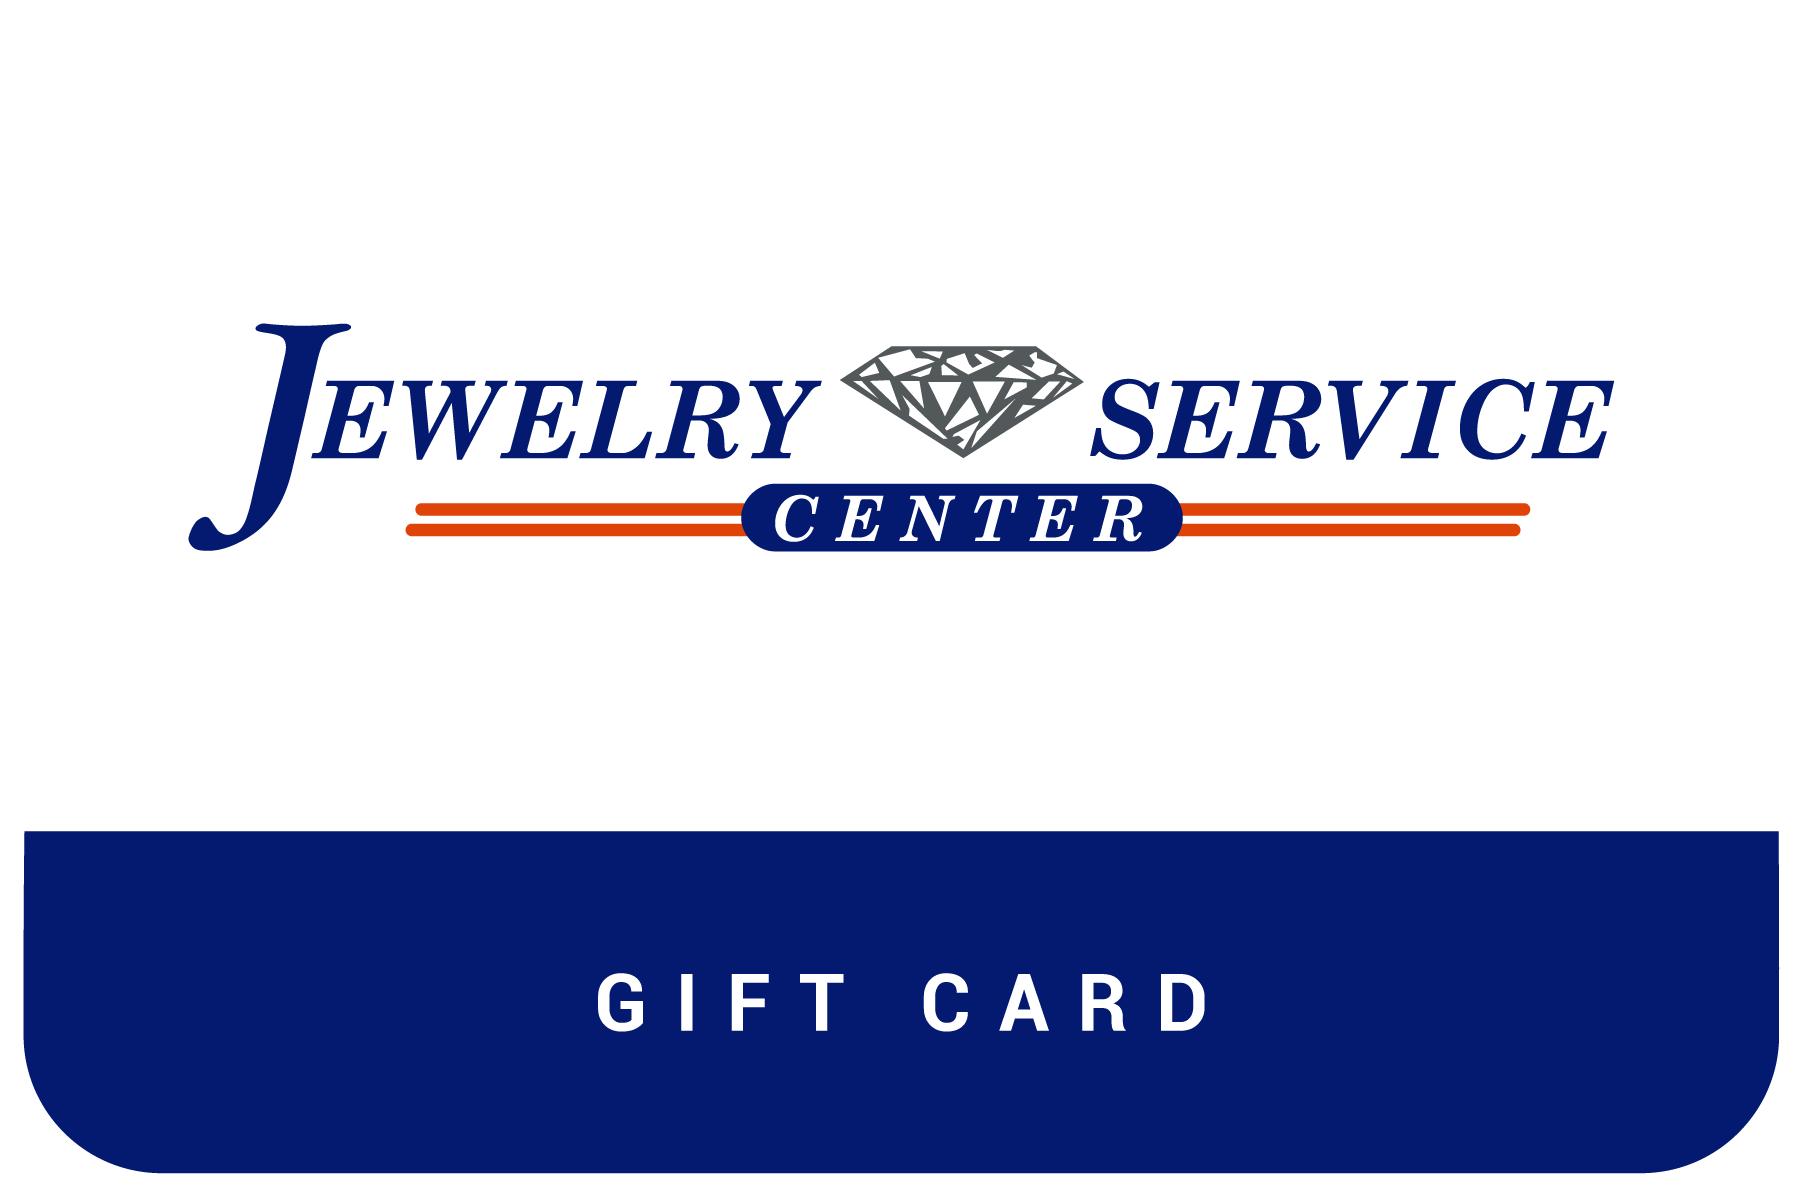 Jewelry Service Center $50 Gift Card